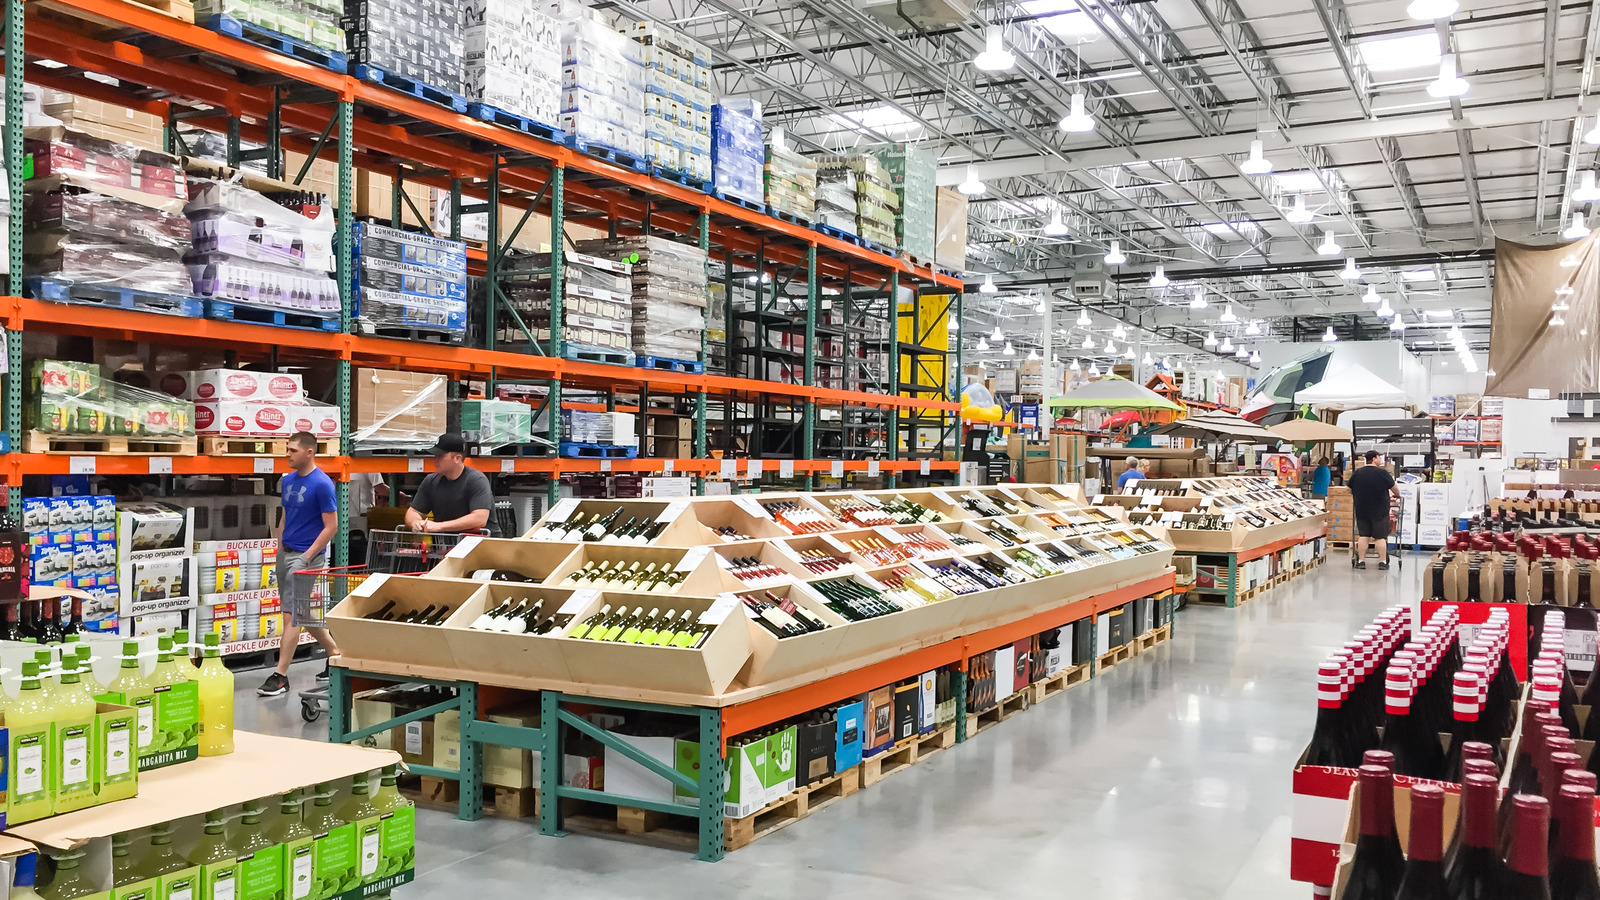 Where You Can Find The Biggest Costco In The World